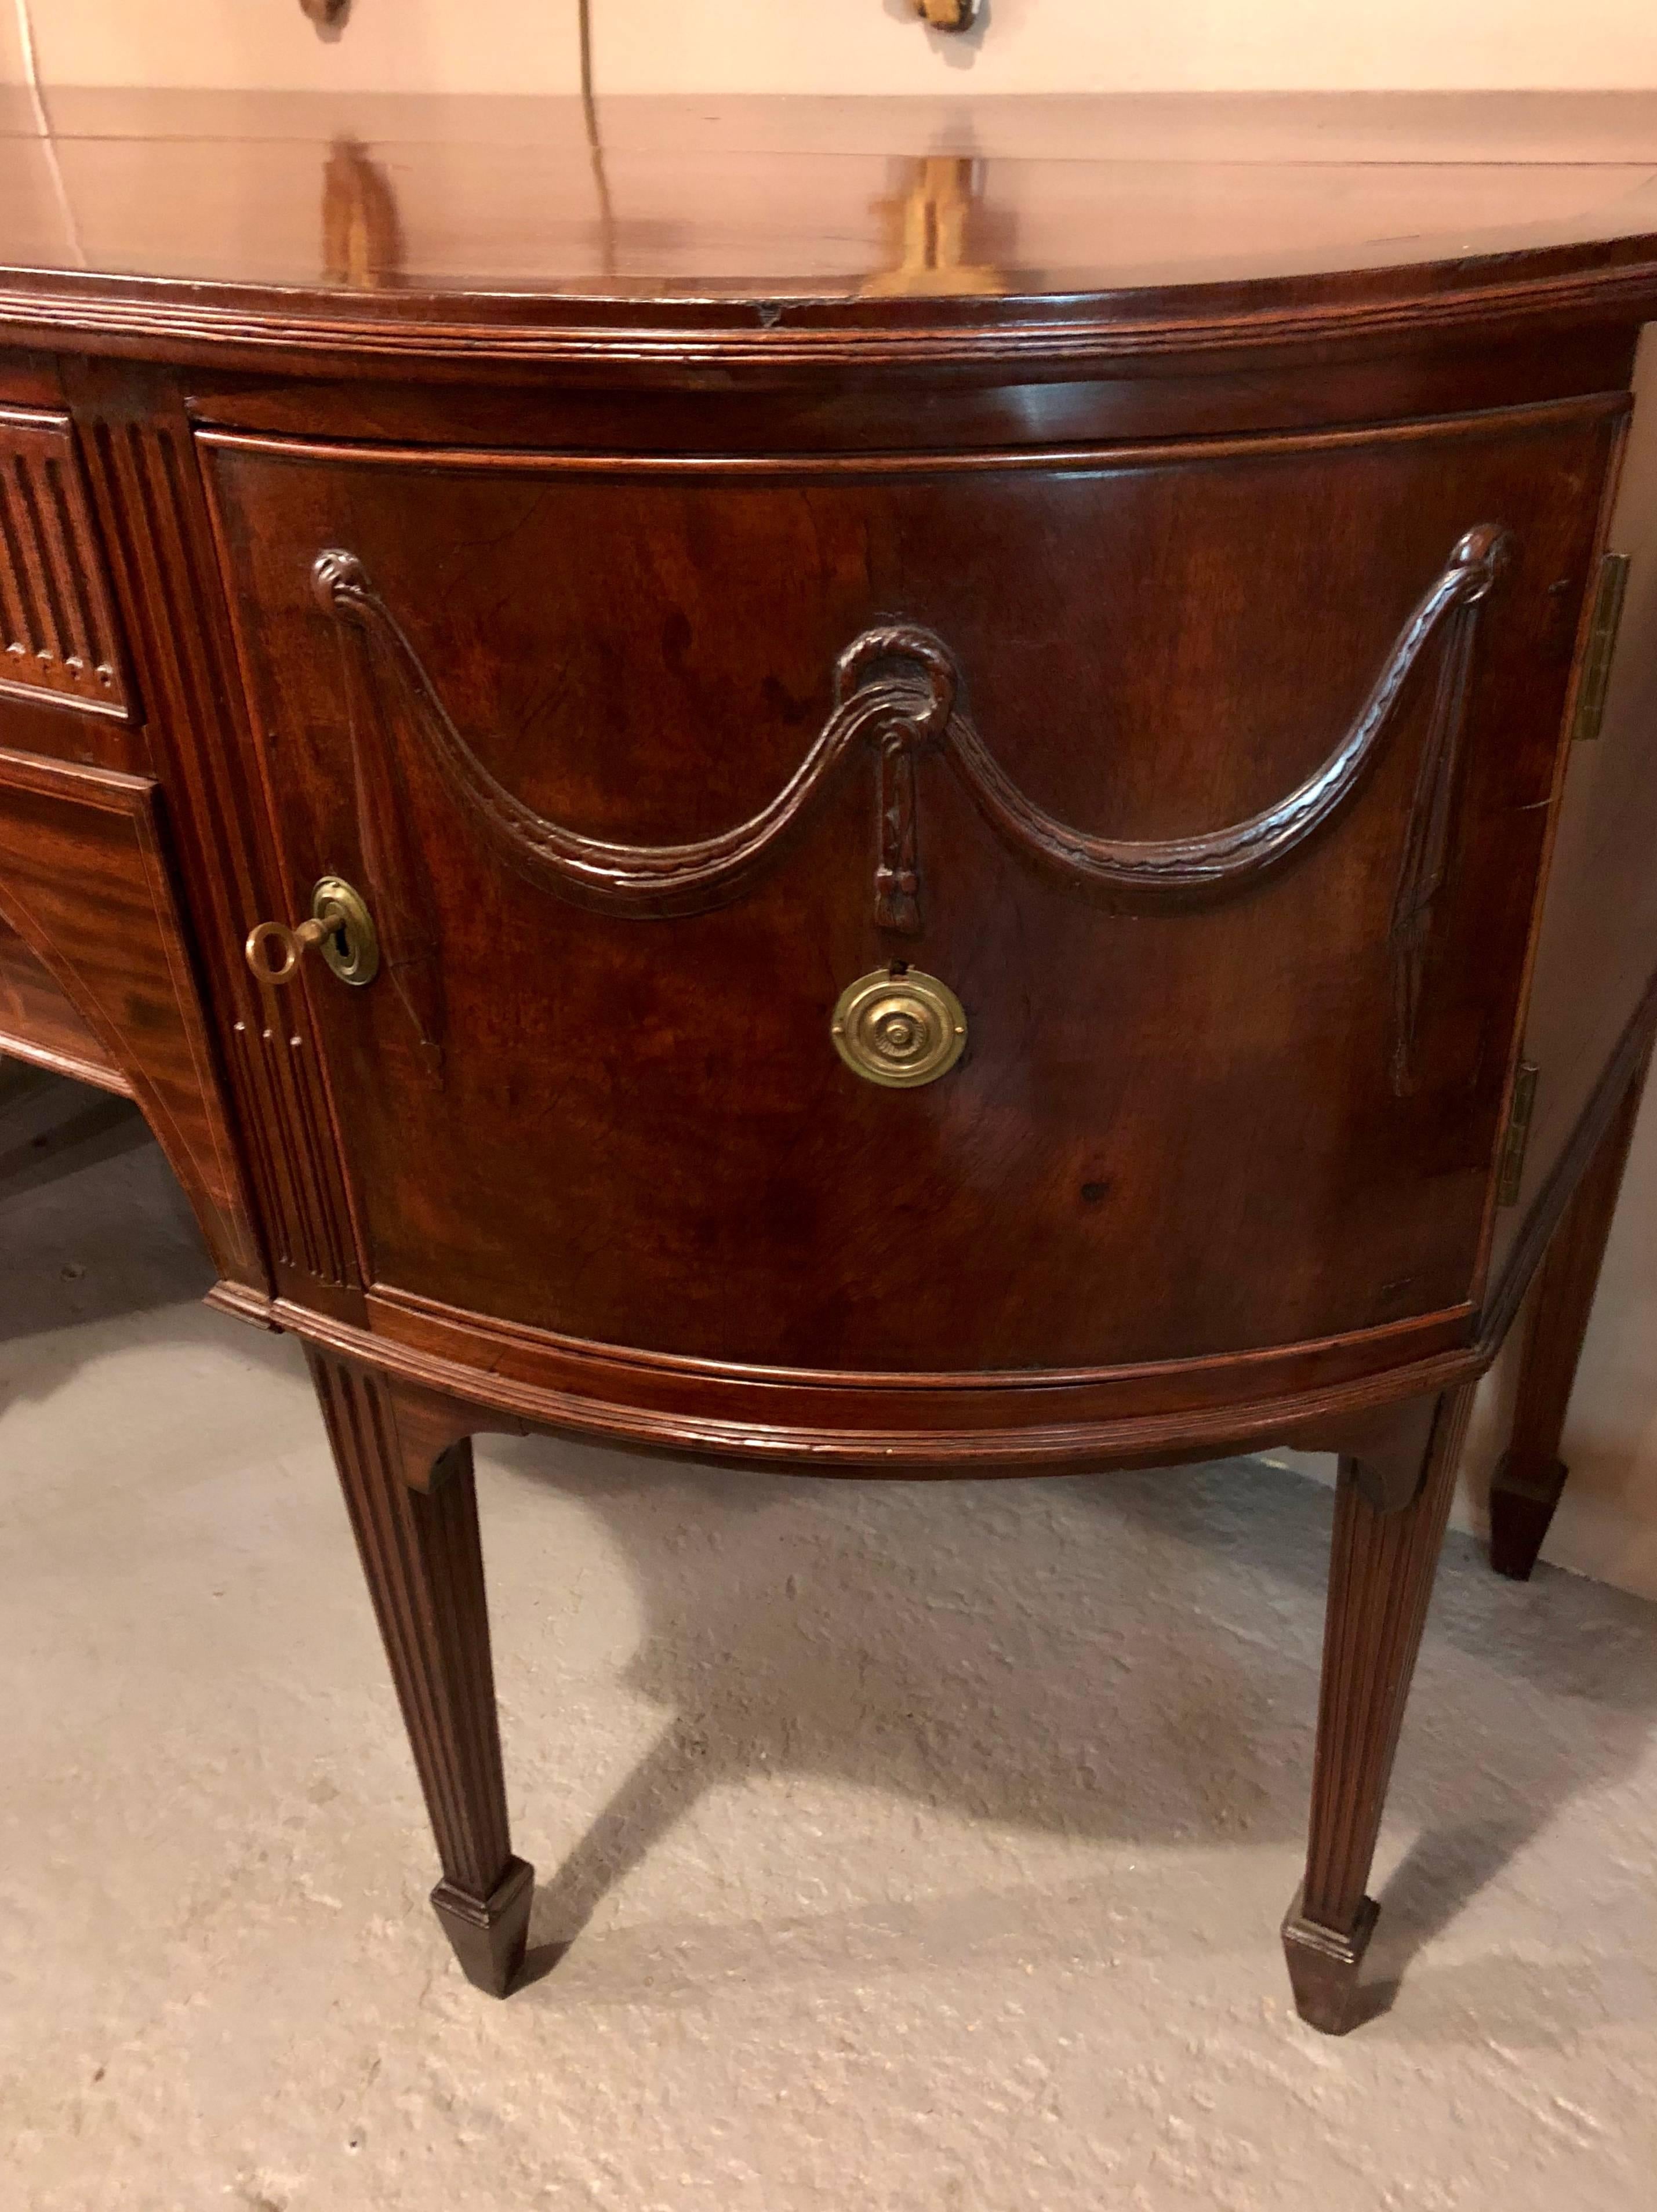 19th Century Georgian Period Demilune Sideboard or Serving Table Breakfront